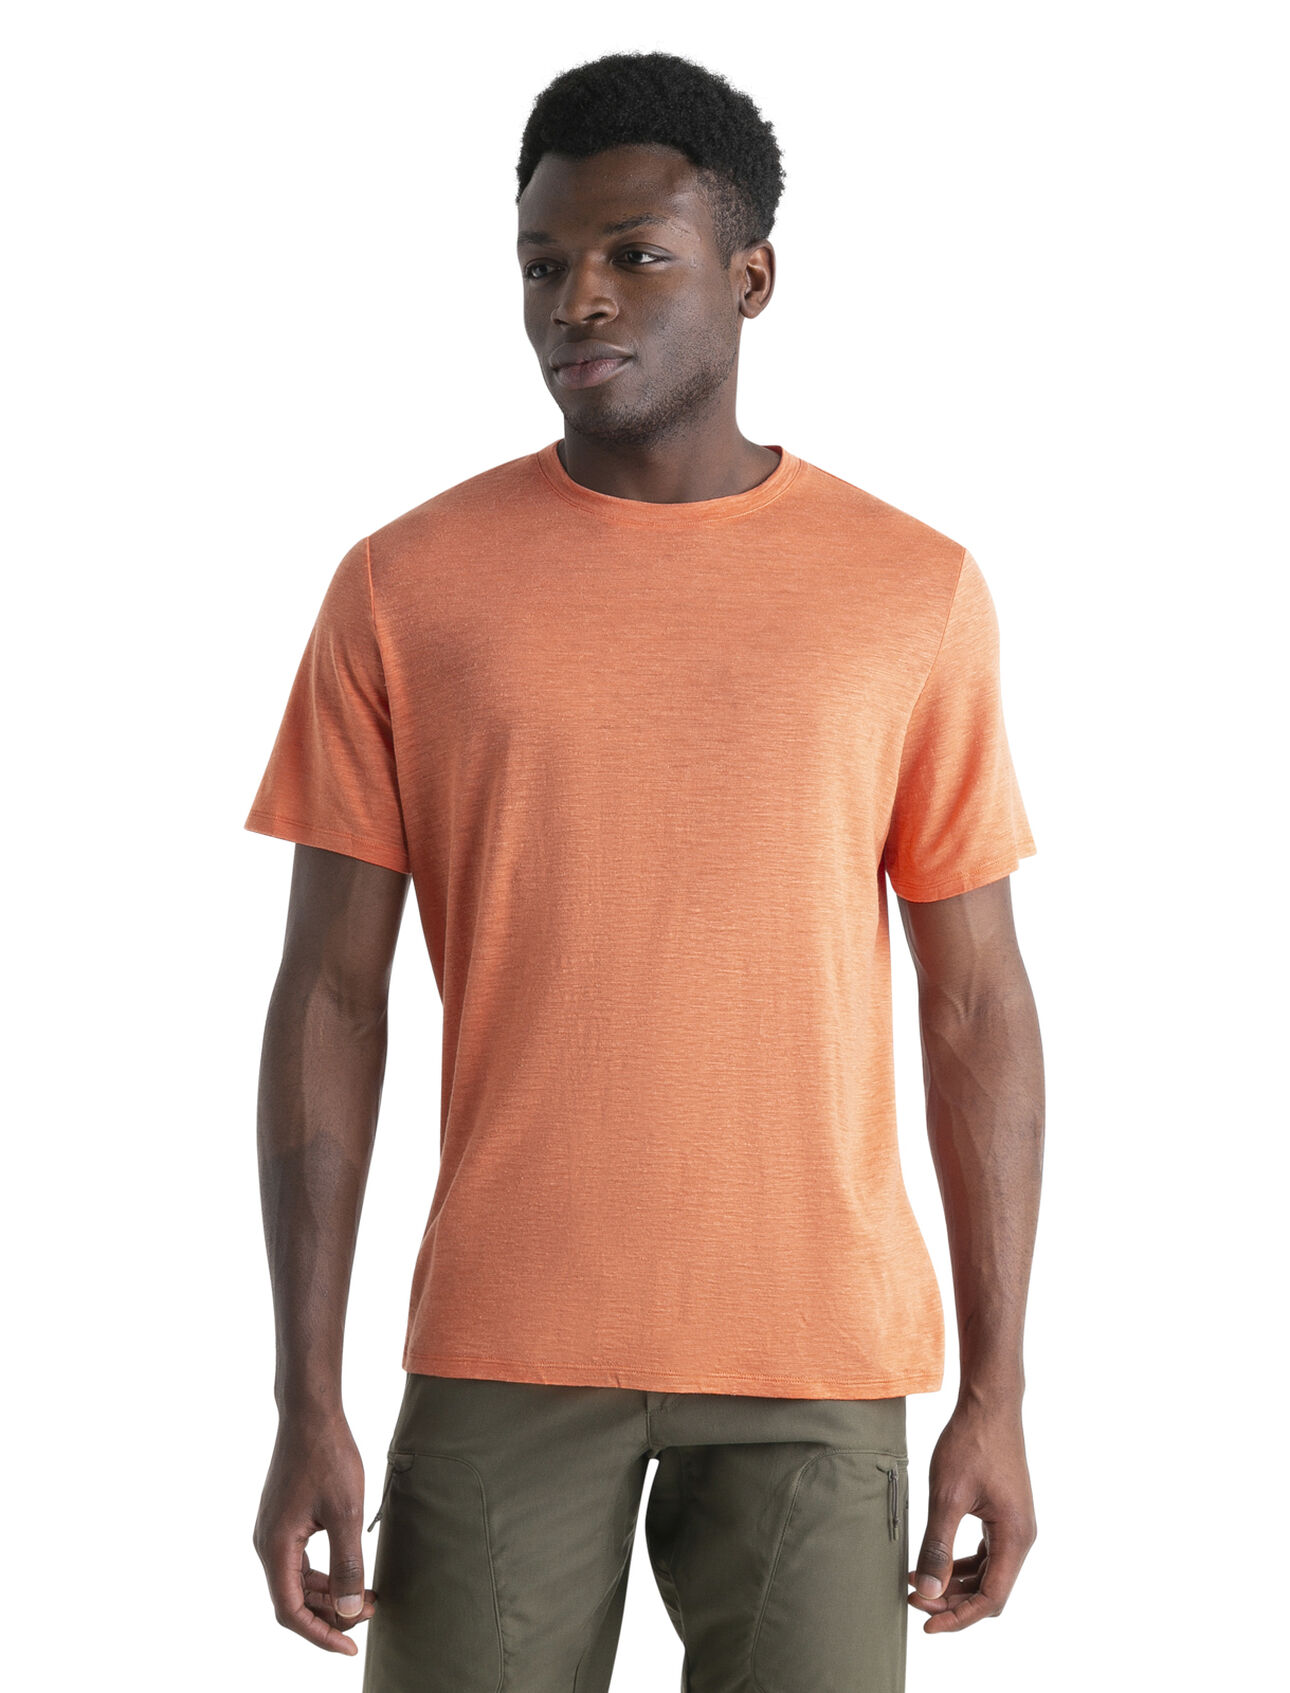 Mens Merino Linen Short Sleeve T-Shirt A lightweight, go-anywhere tee made with a soft blend of merino wool and linen, the Merino Linen Short Sleeve Tee is a staple for everyday comfort and style.